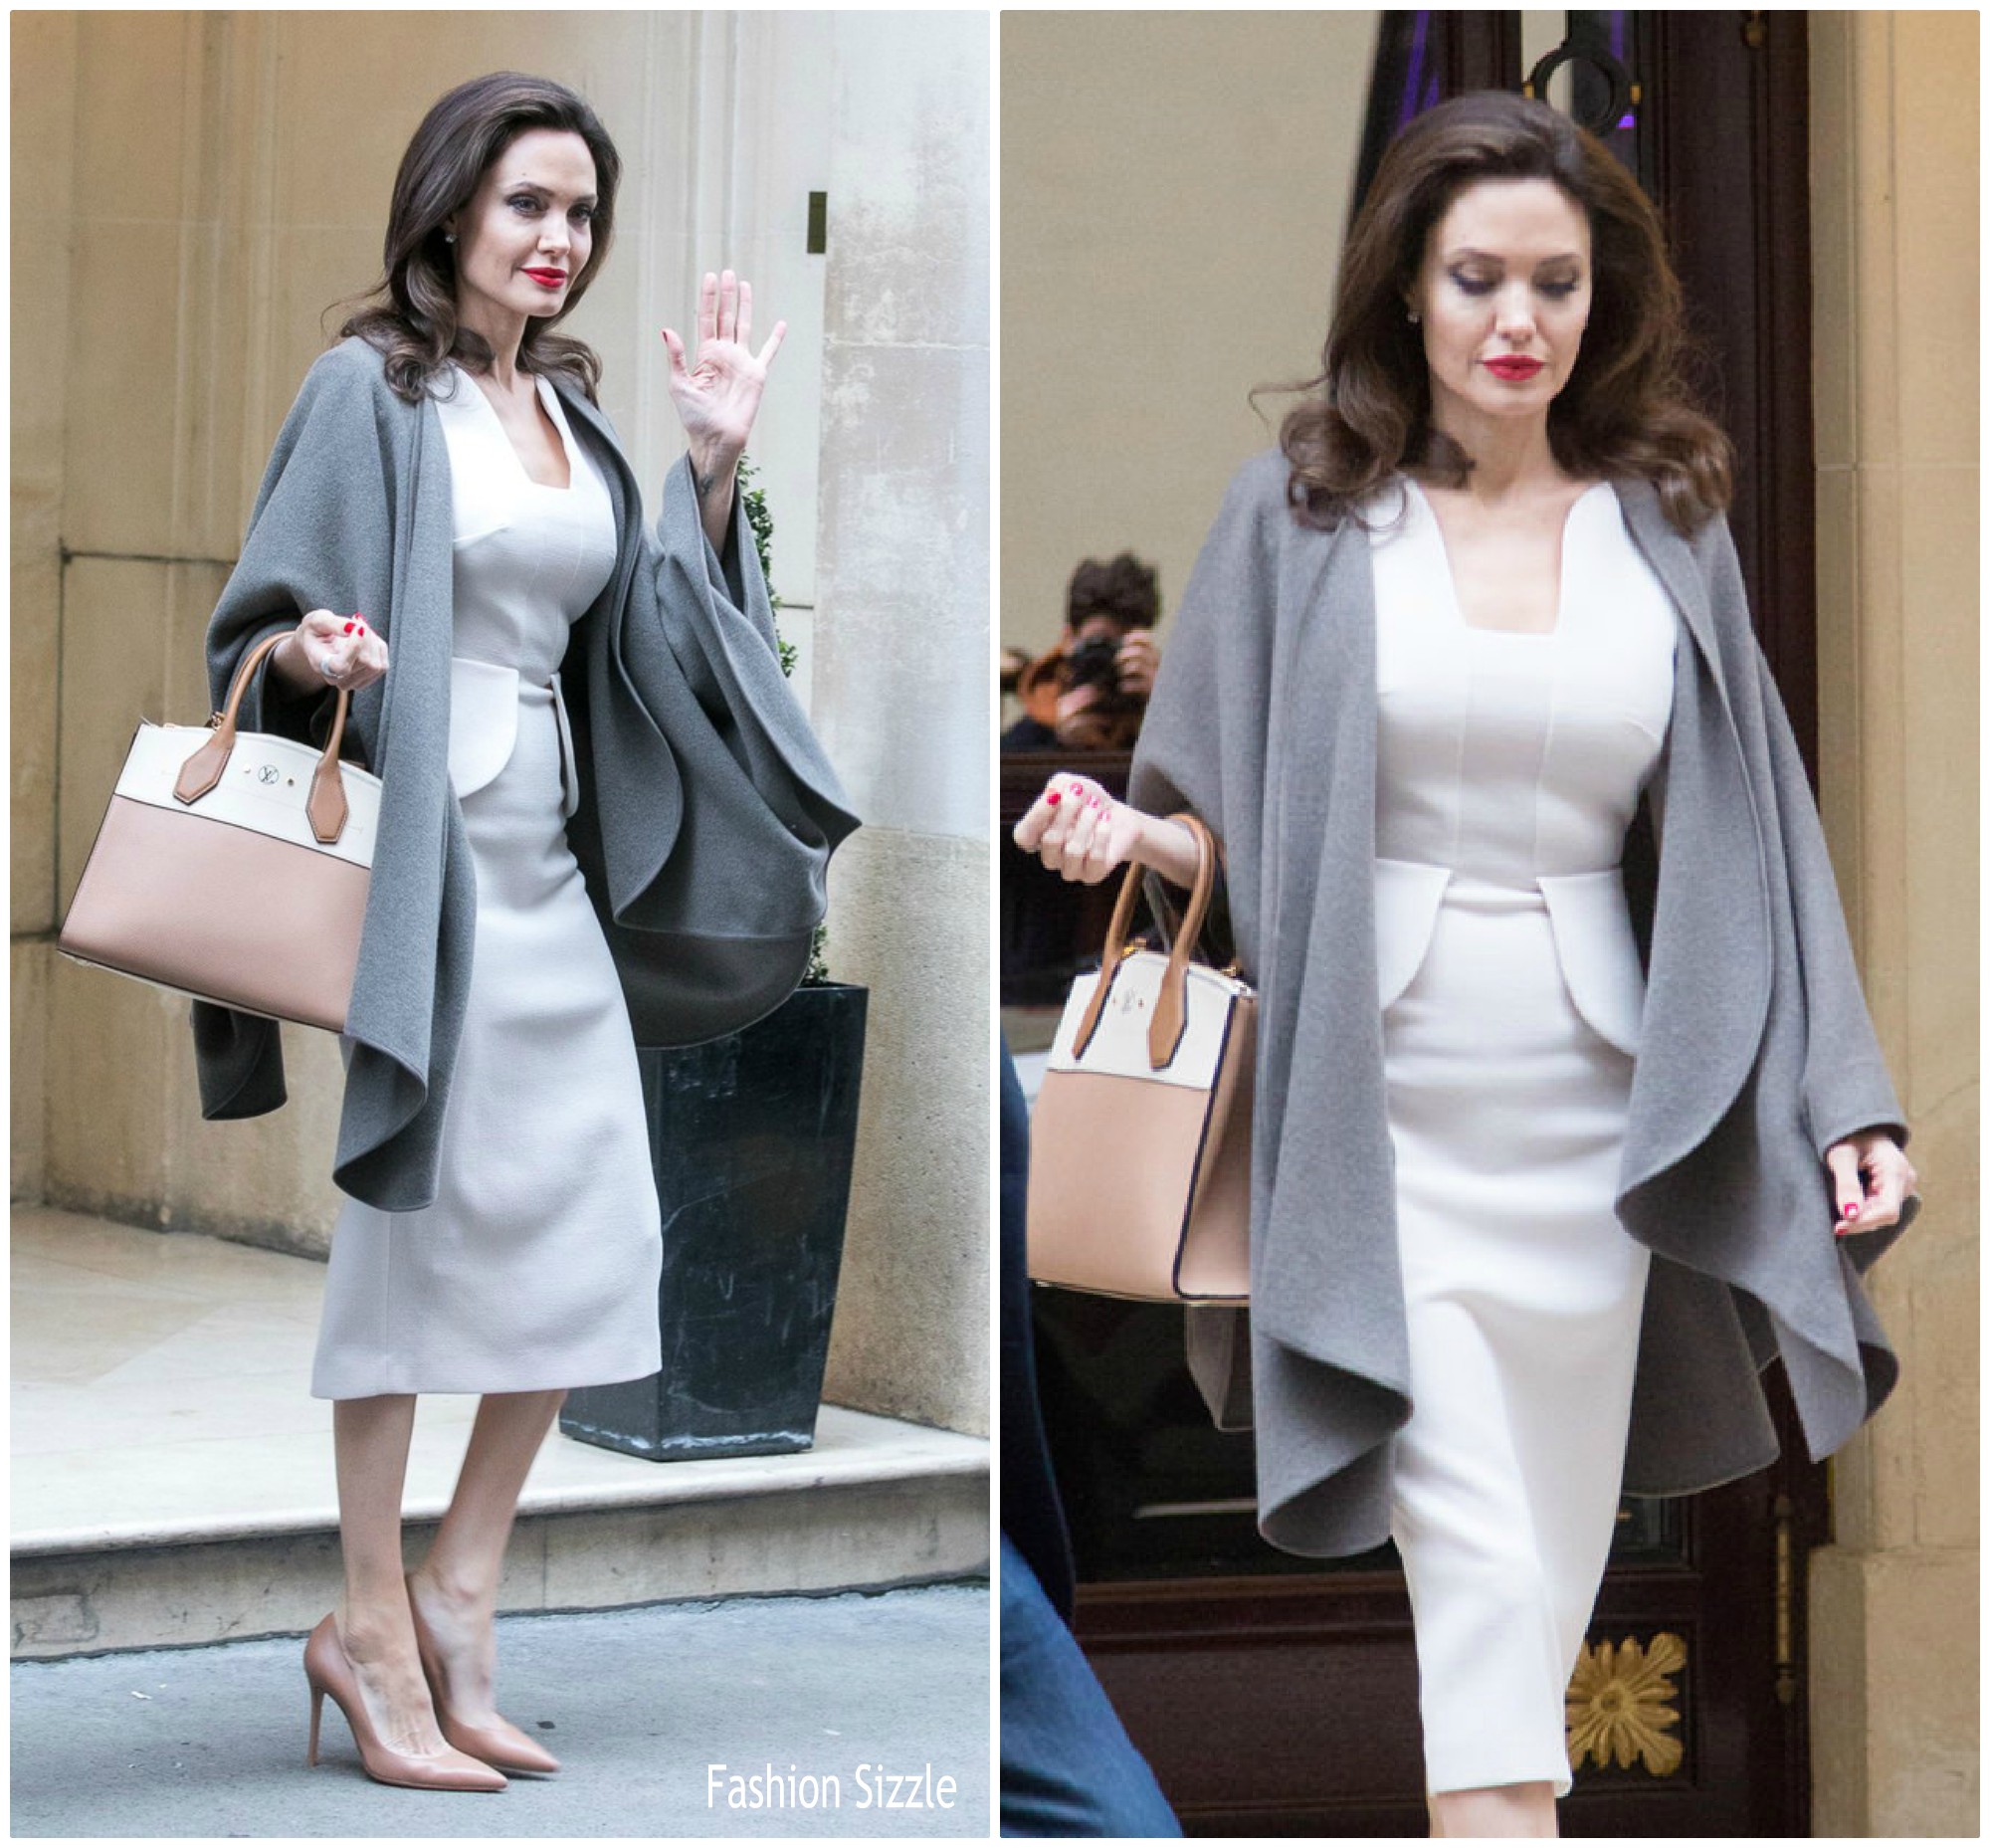 angelina-jolie-in-roland-mouret-out-in-paris